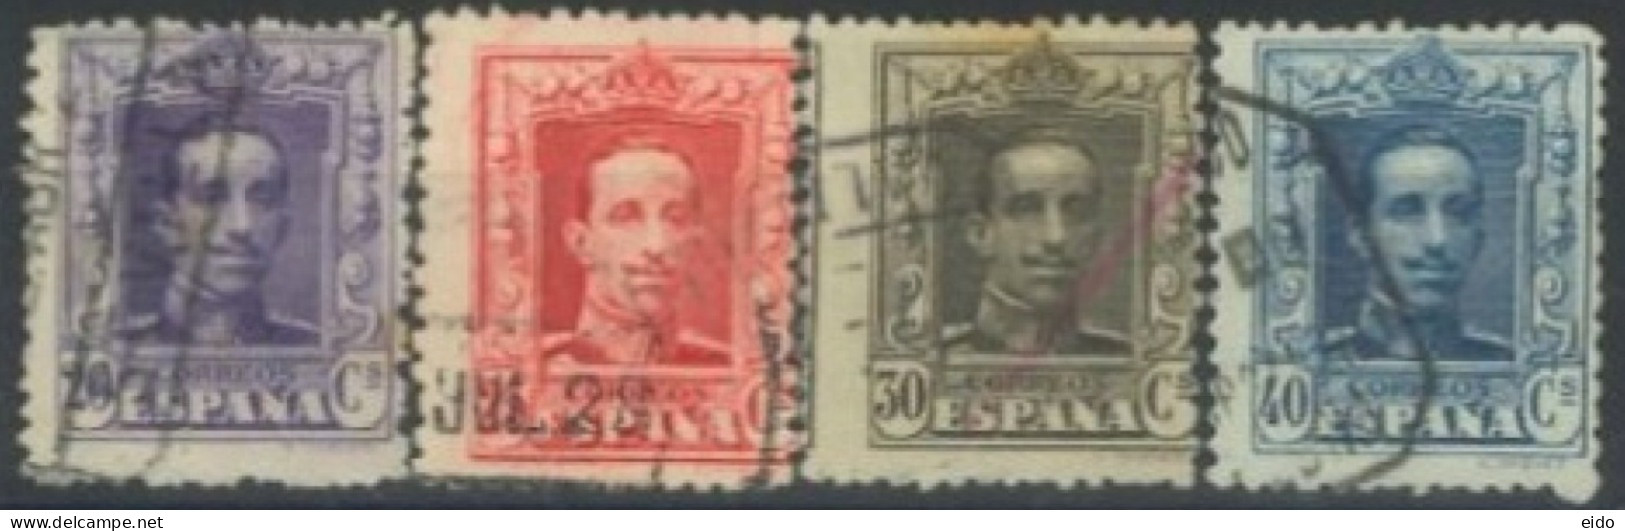 SPAIN, 1922/26, KING ALFONSO XIII STAMPS SET OF 4 # 337/40, USED. - Oblitérés